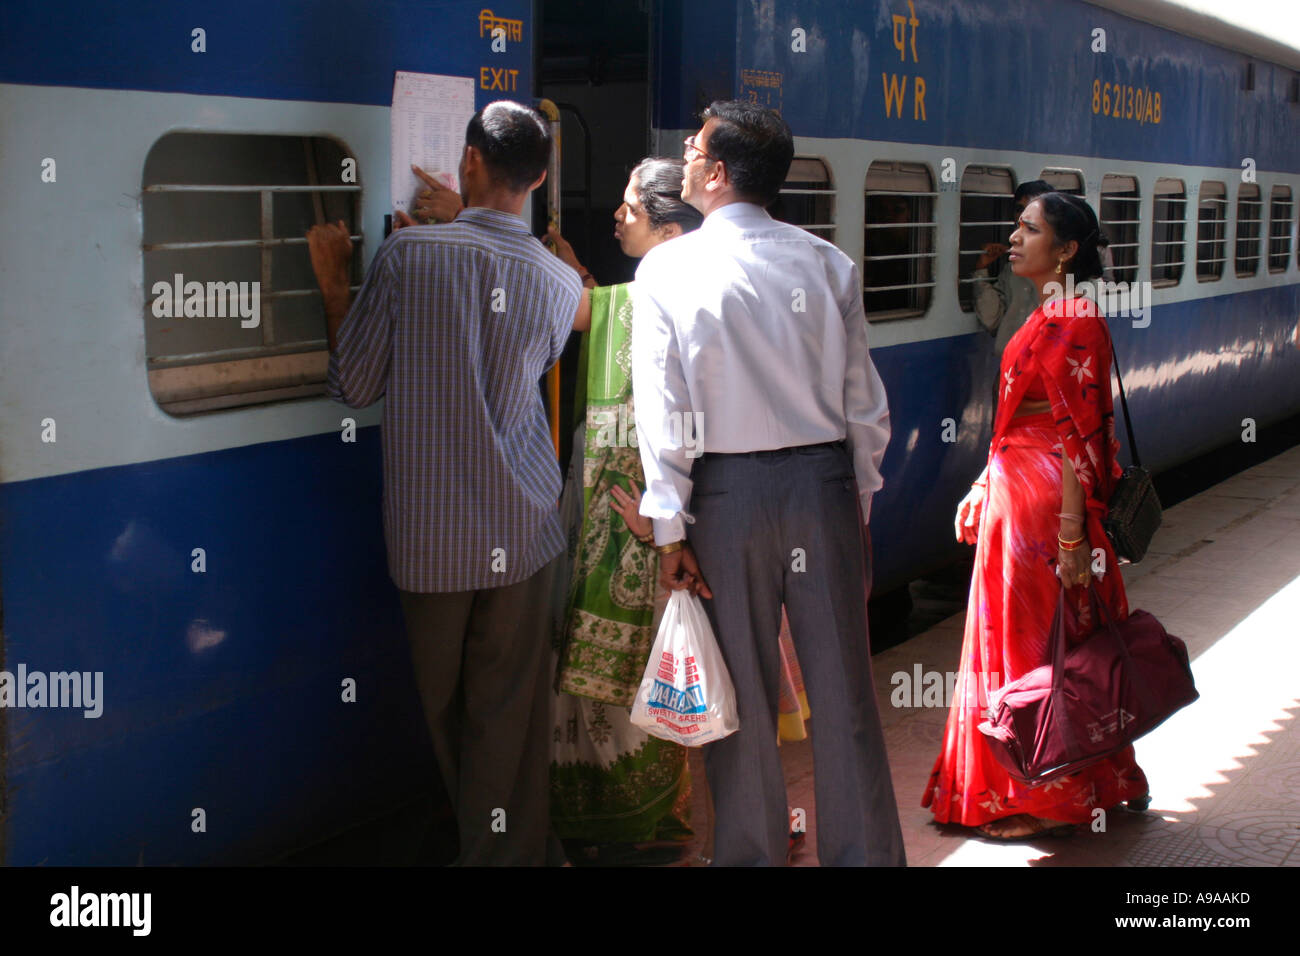 Passengers check seating plan for train, Jaipur Junction station, Rajasthan, India Stock Photo